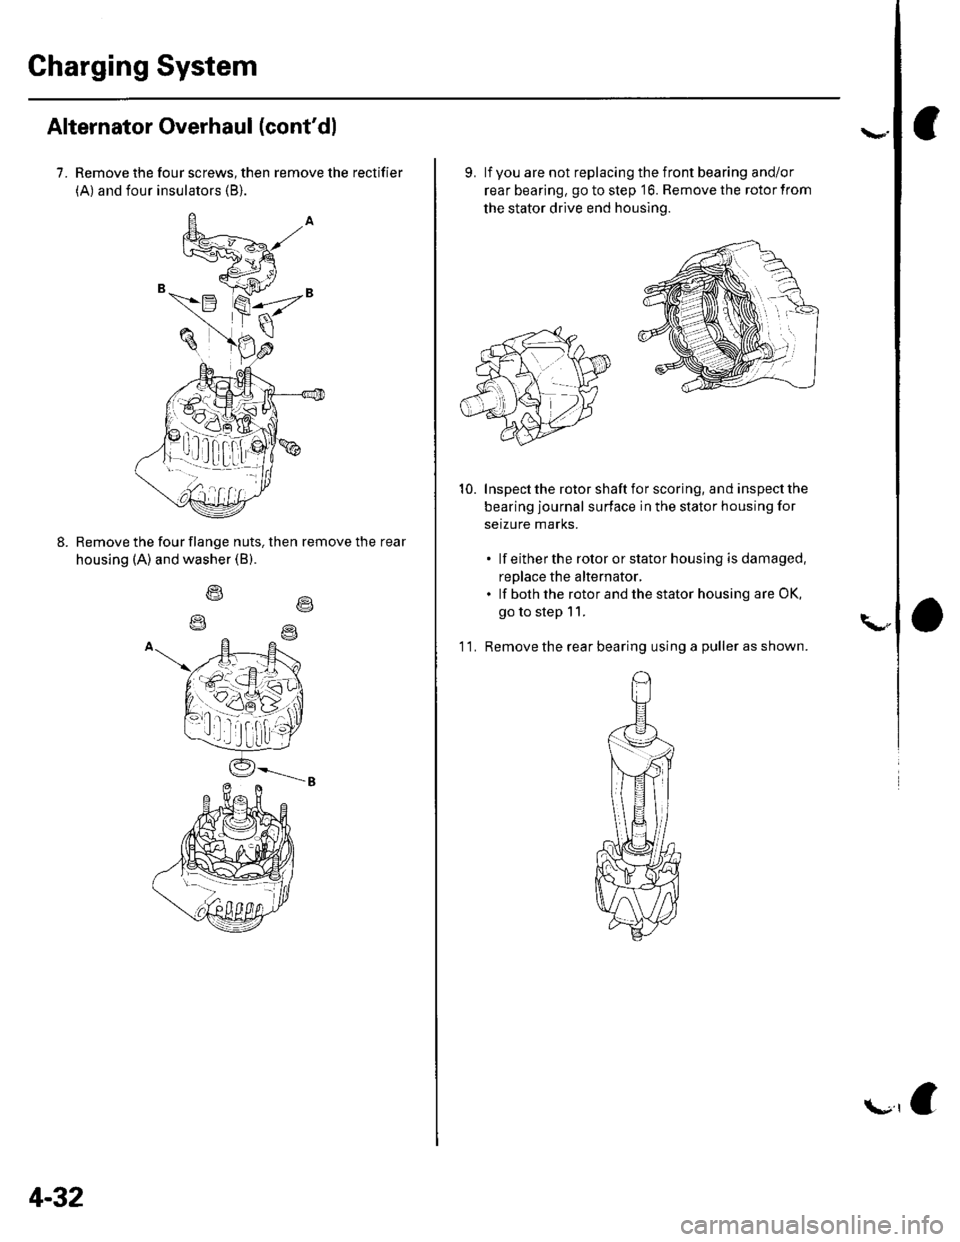 HONDA CIVIC 2003 7.G User Guide Charging System
Alternator Overhaul (contdl
7. Remove the four screws, then remove the rectifier
(A) and four insulators (B).
Remove the four flange nuts, then remove the rear
housing (A) and washer 